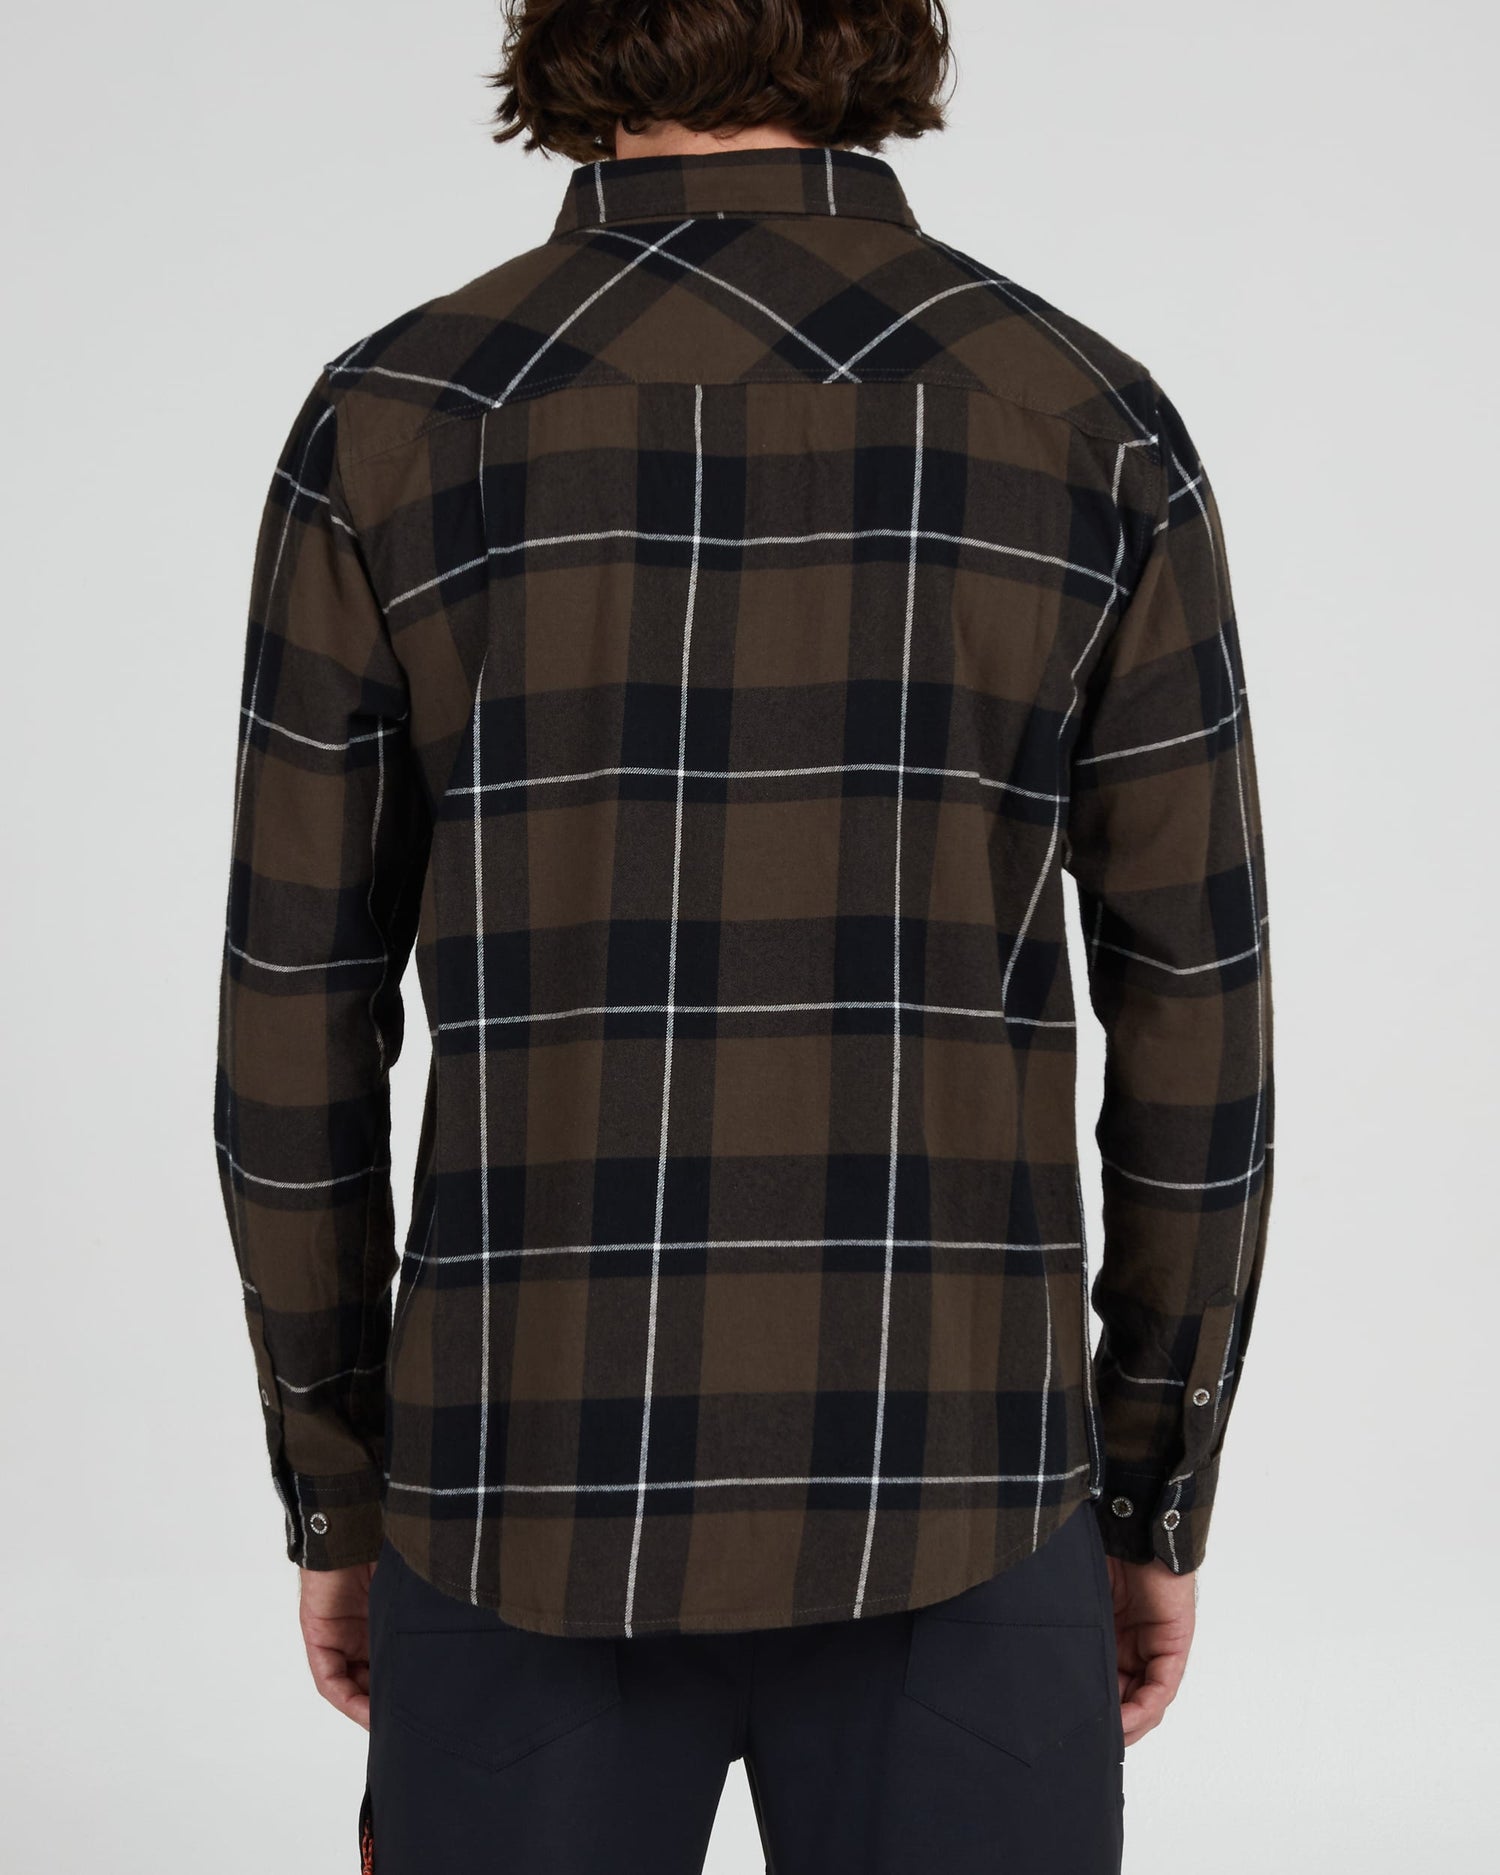 Salty crew WOVEN SHIRTS FIRST LIGHT FLANNEL - Black/Brown in Black/Brown